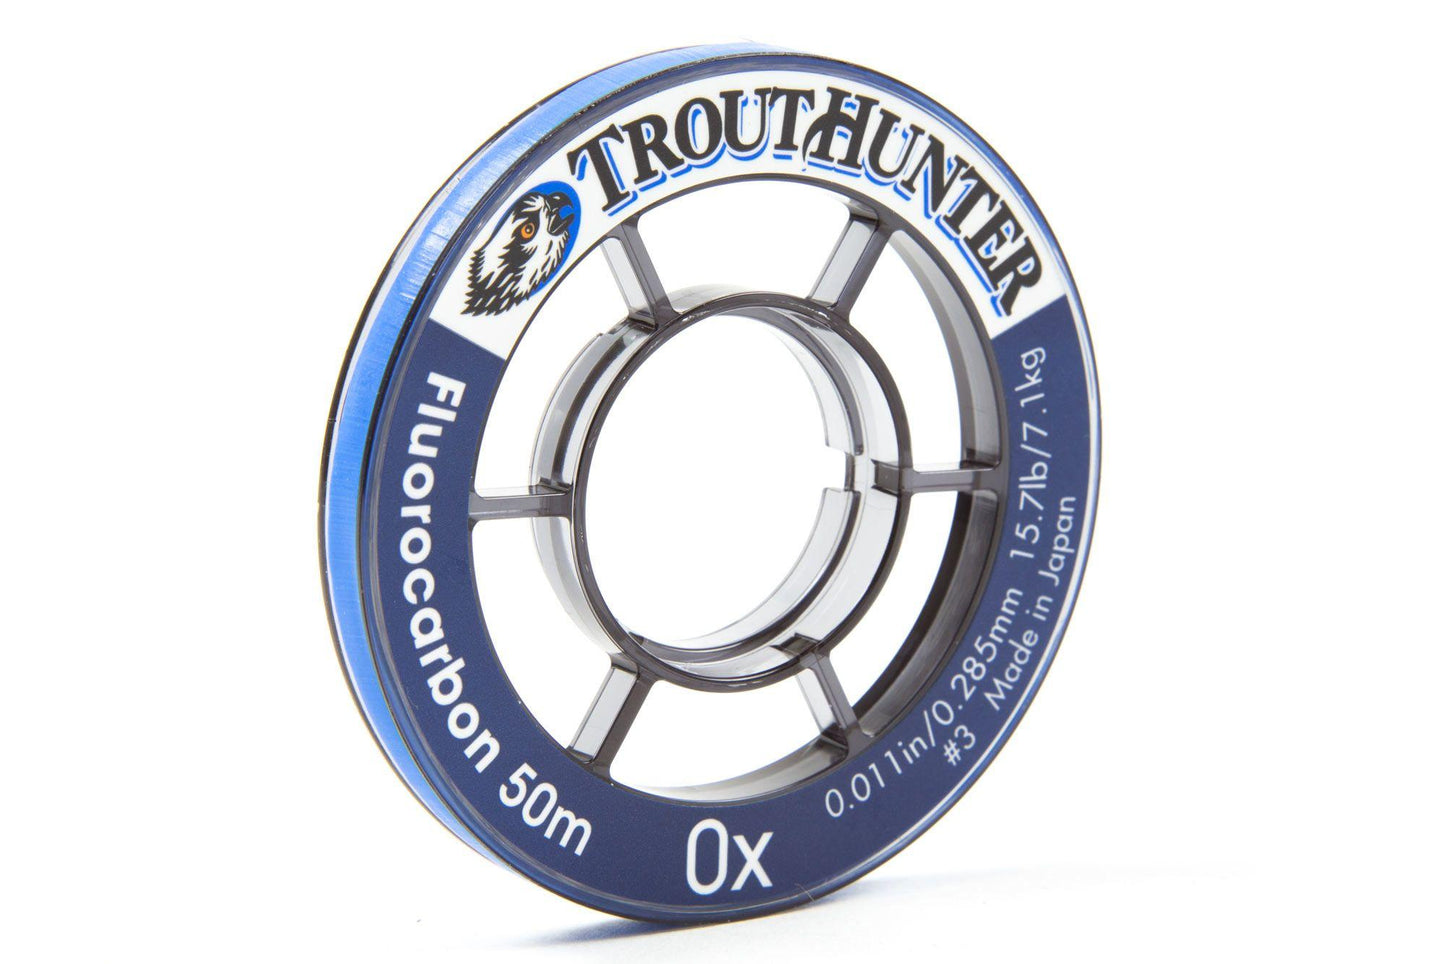 Trouthunter Fluorocarbon Tippet